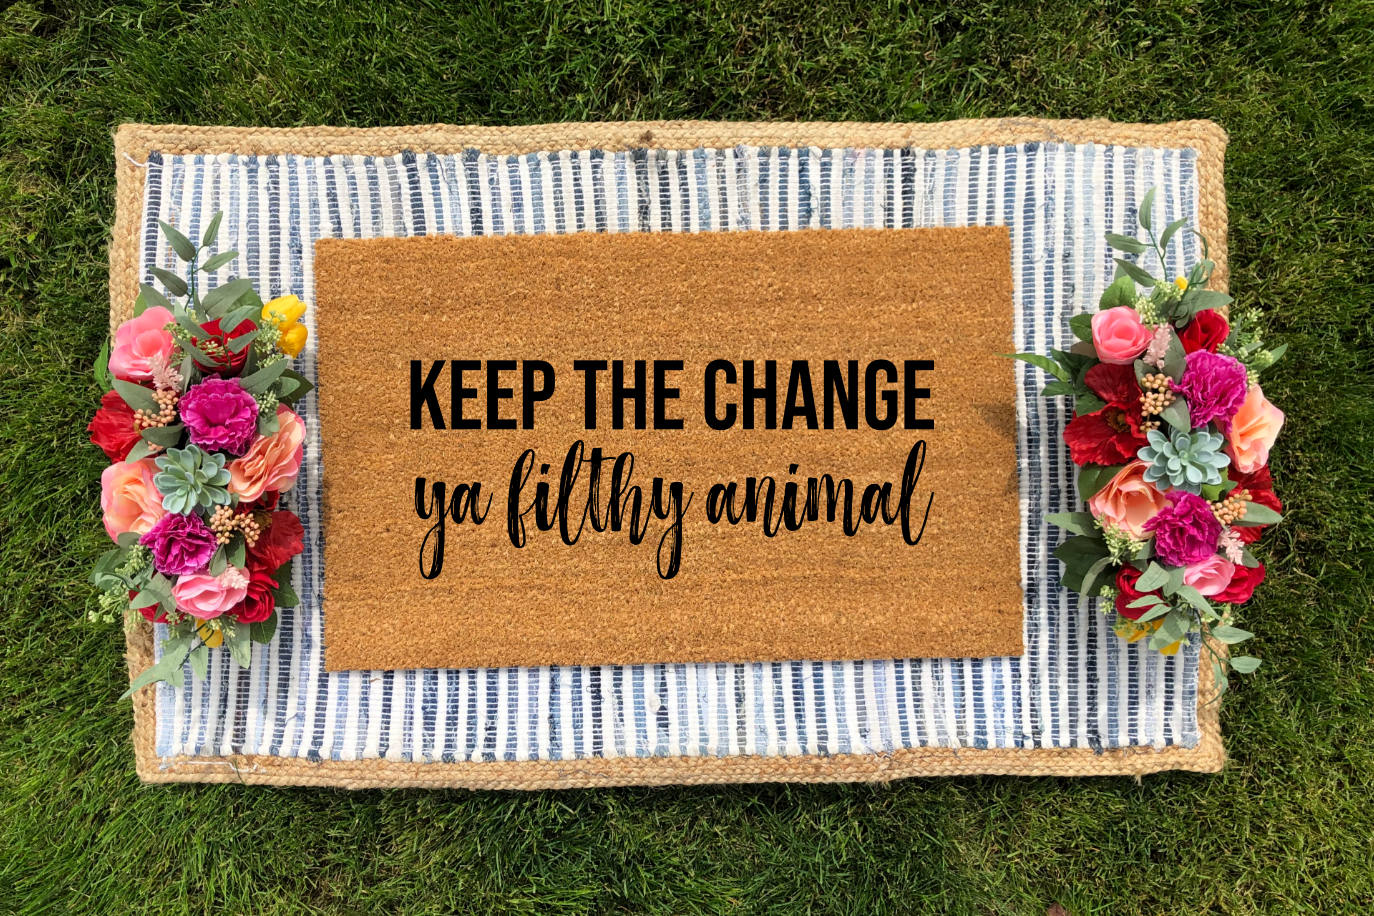 Keep the Change Ya Filthy Animal Doormat - The Minted Grove